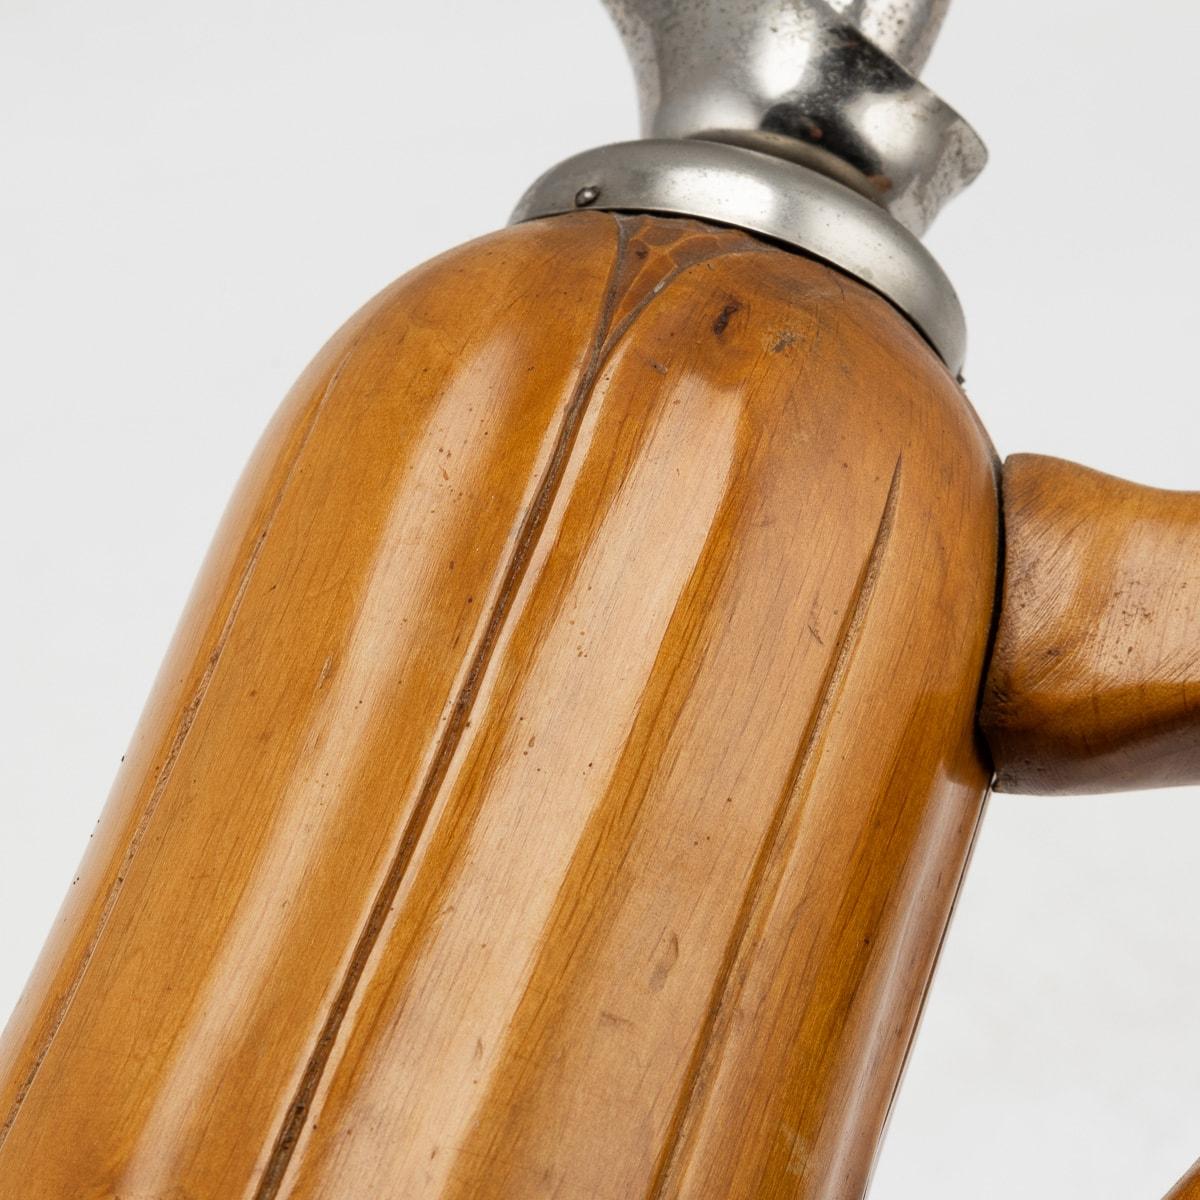 20th Century Italian Wooden Flask By Aldo Tura For Macabo c.1960 For Sale 8